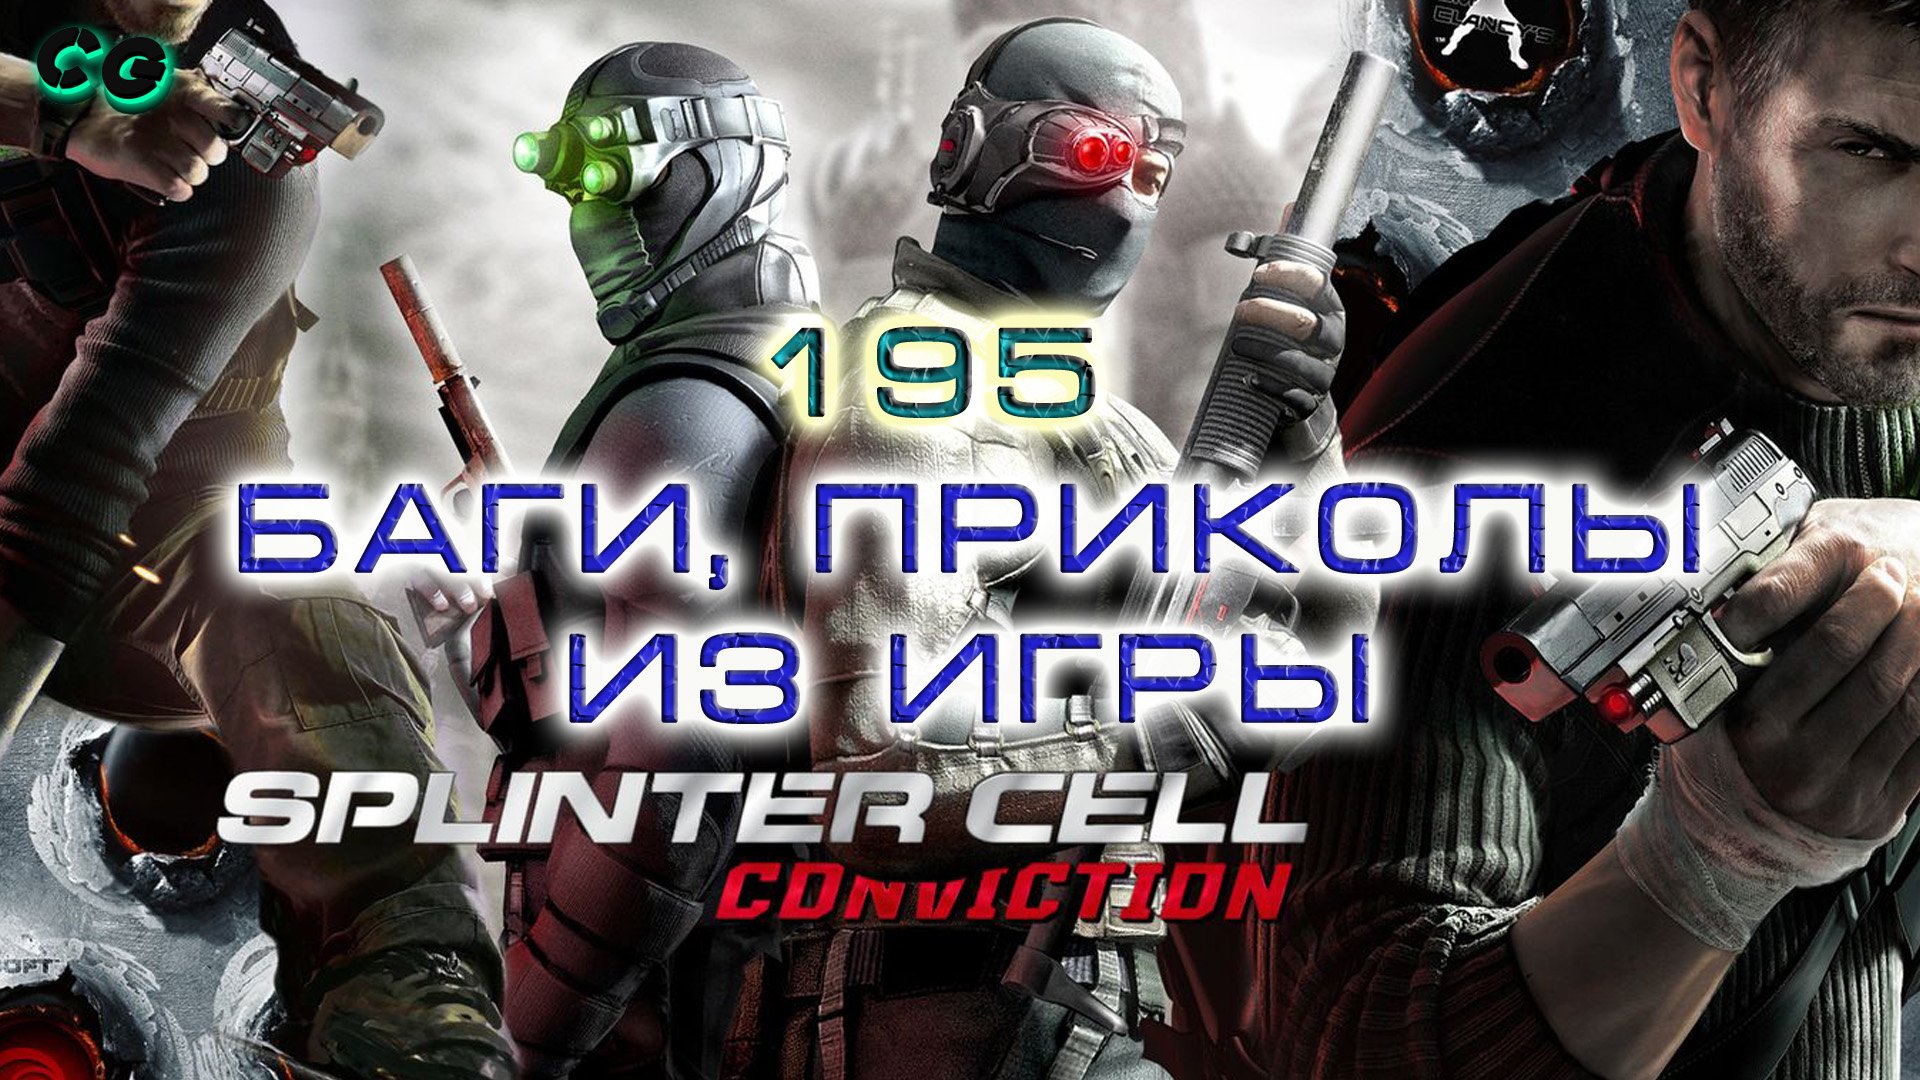 BestMoments #195 Tom Clancy's Splinter Cell Conviction. Баги Приколы